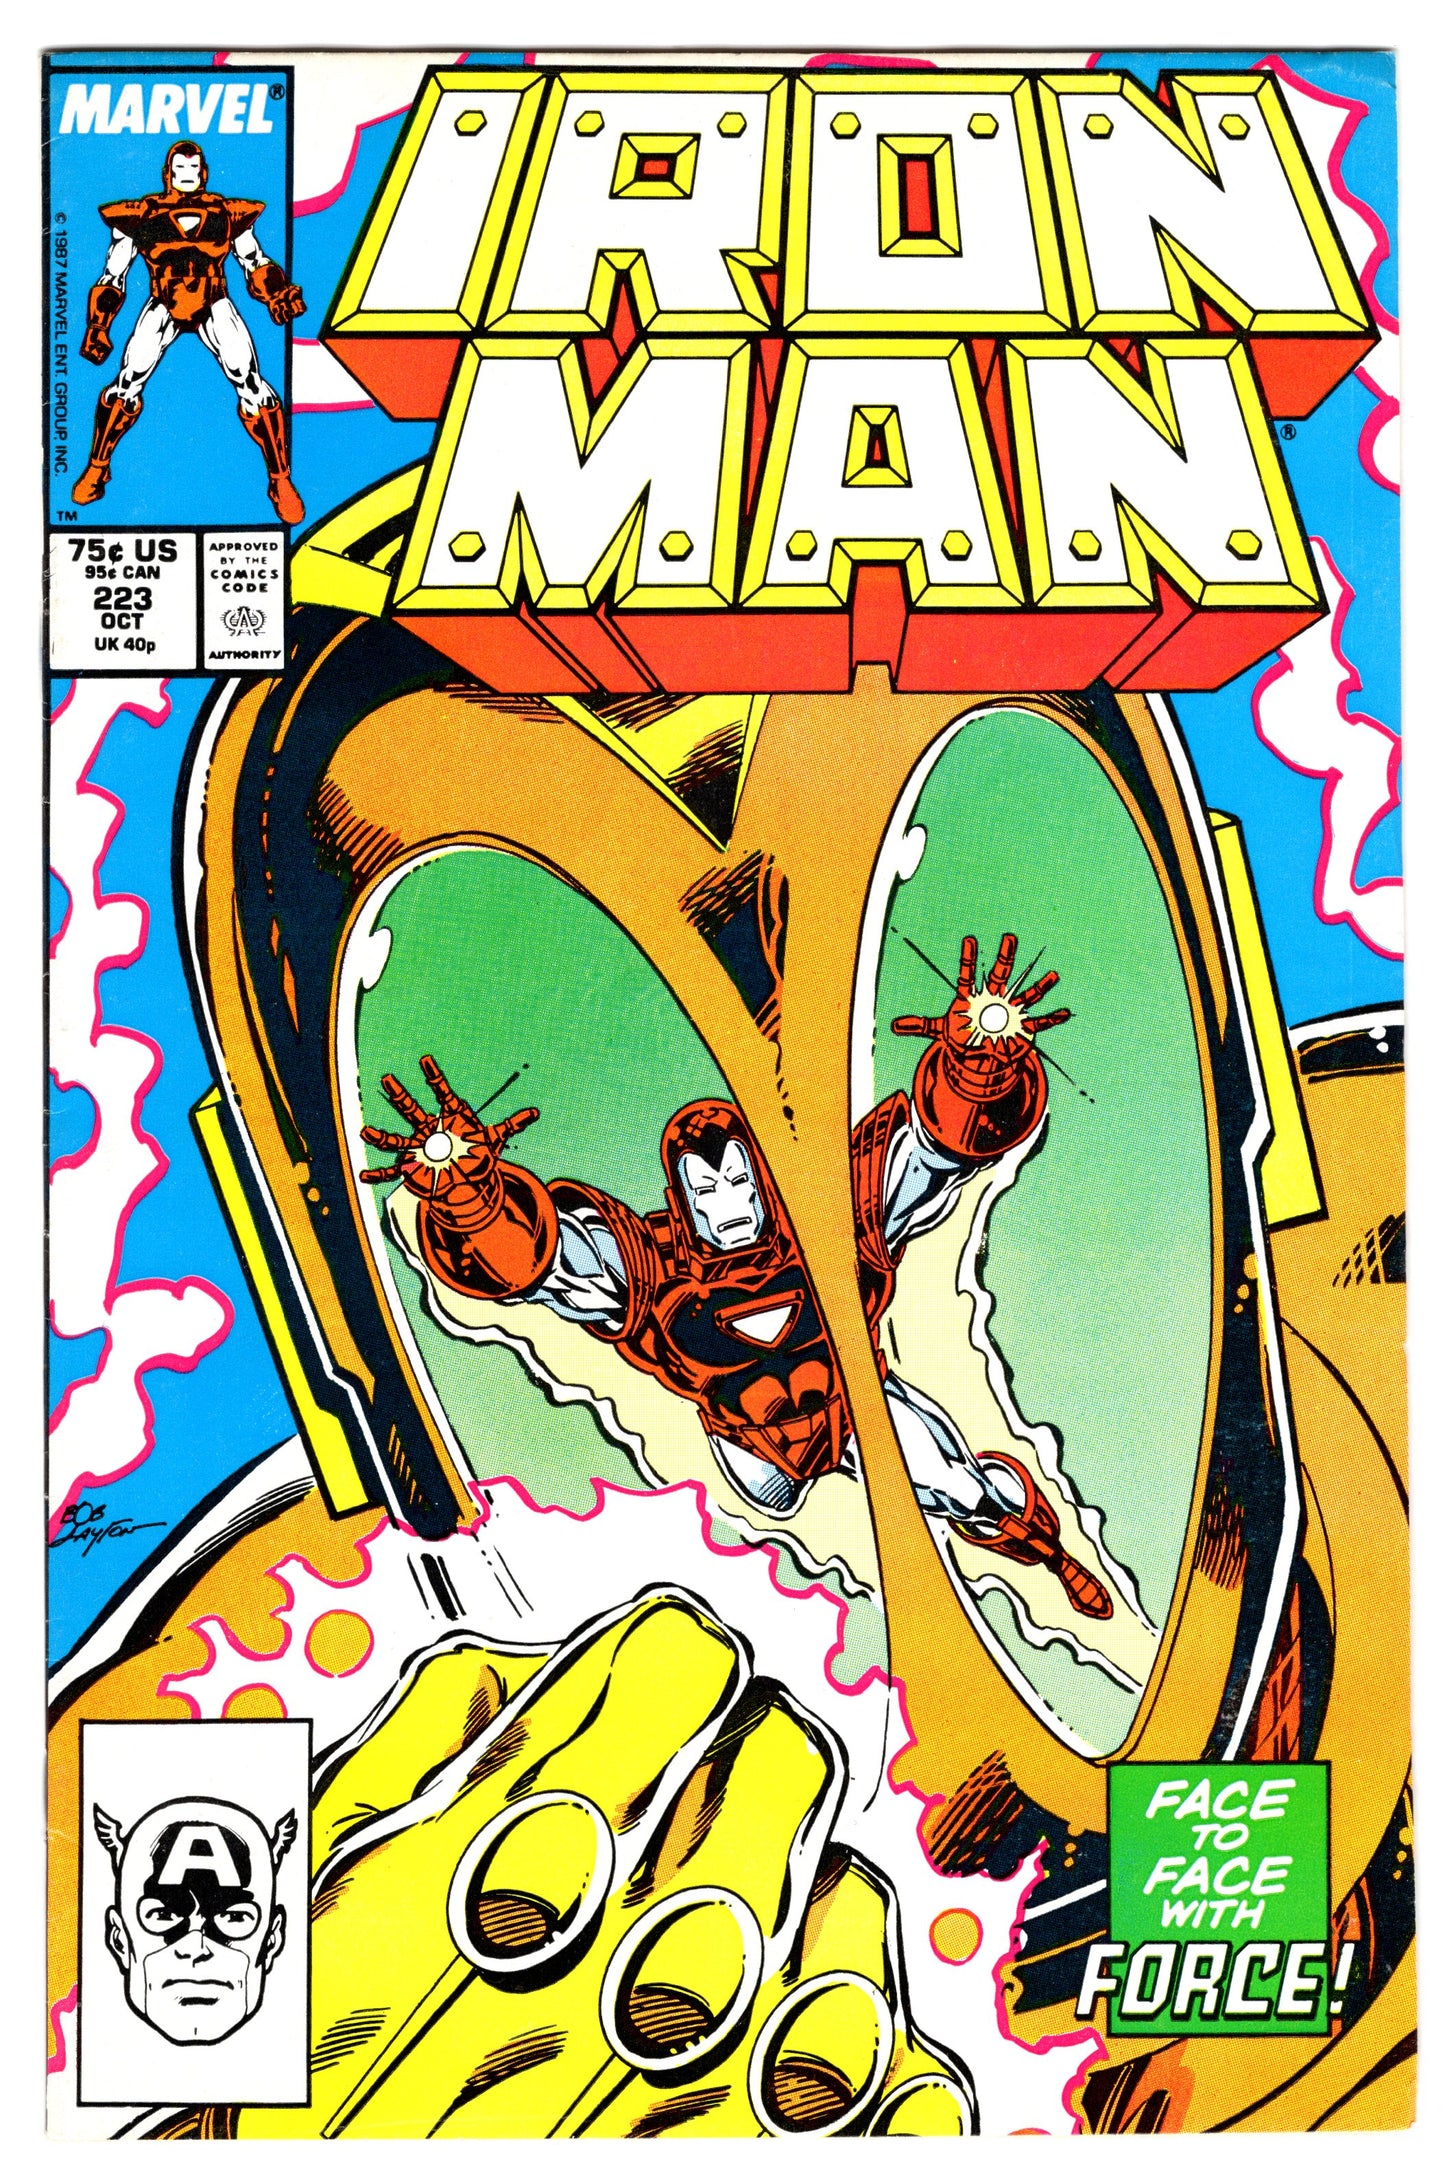 Iron Man Issue #223 "Face to Face with Force!" (Oct., 1987 - Marvel Comics) FN